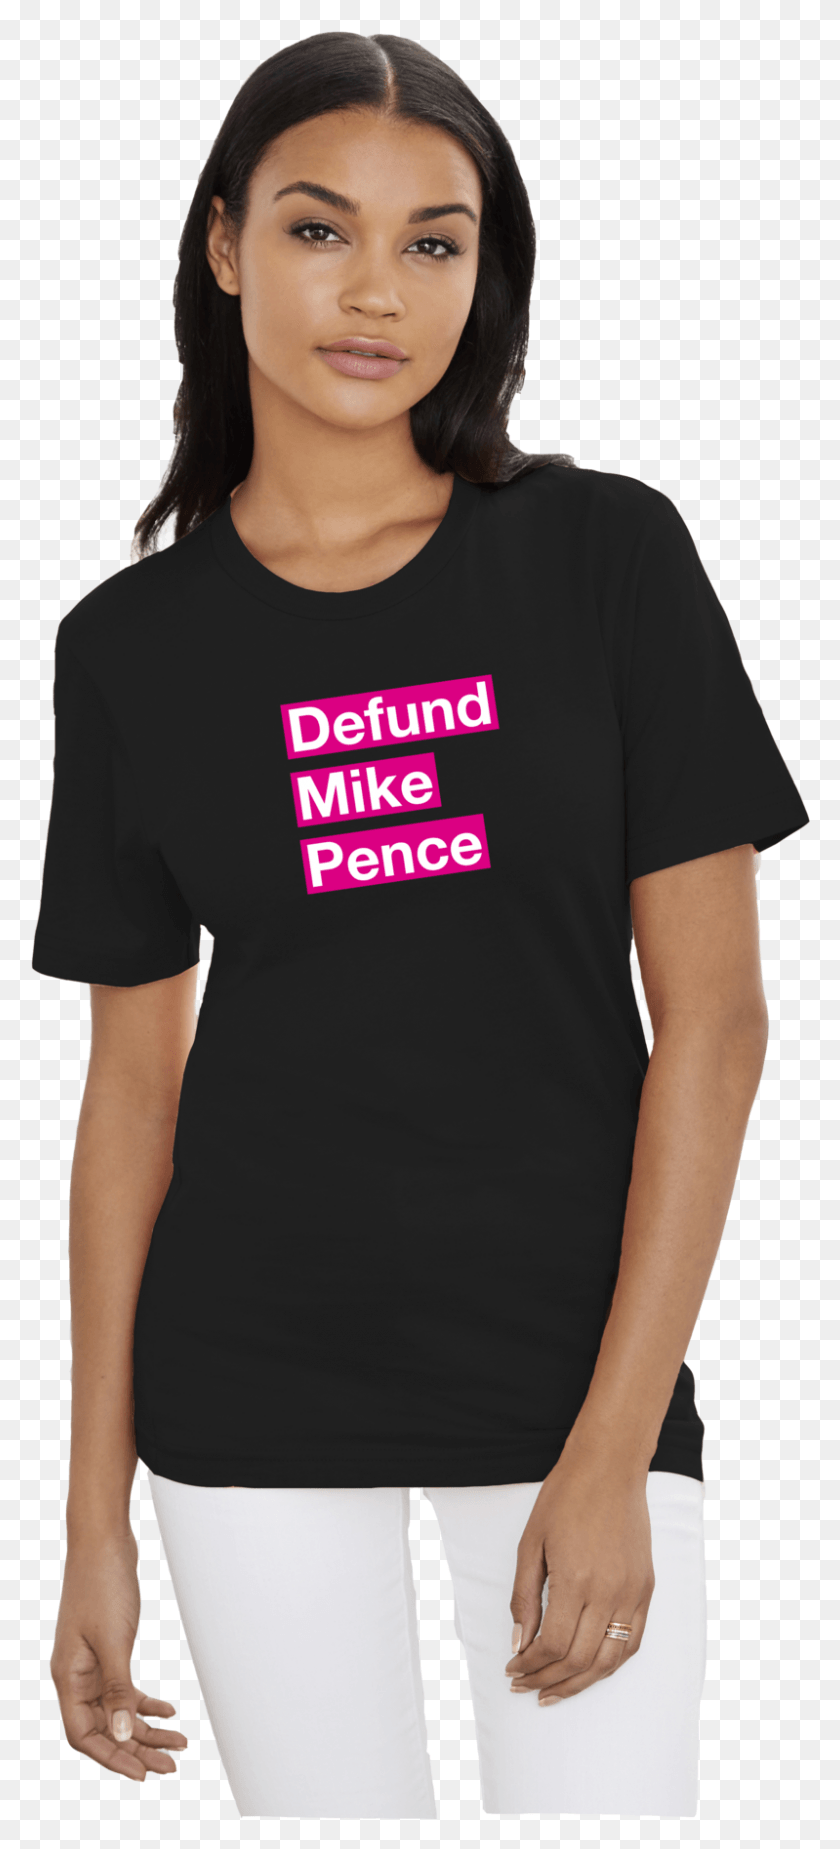 799x1833 Descargar Png Defund Mike Pence Tee Girl, Ropa, Persona, Persona Hd Png